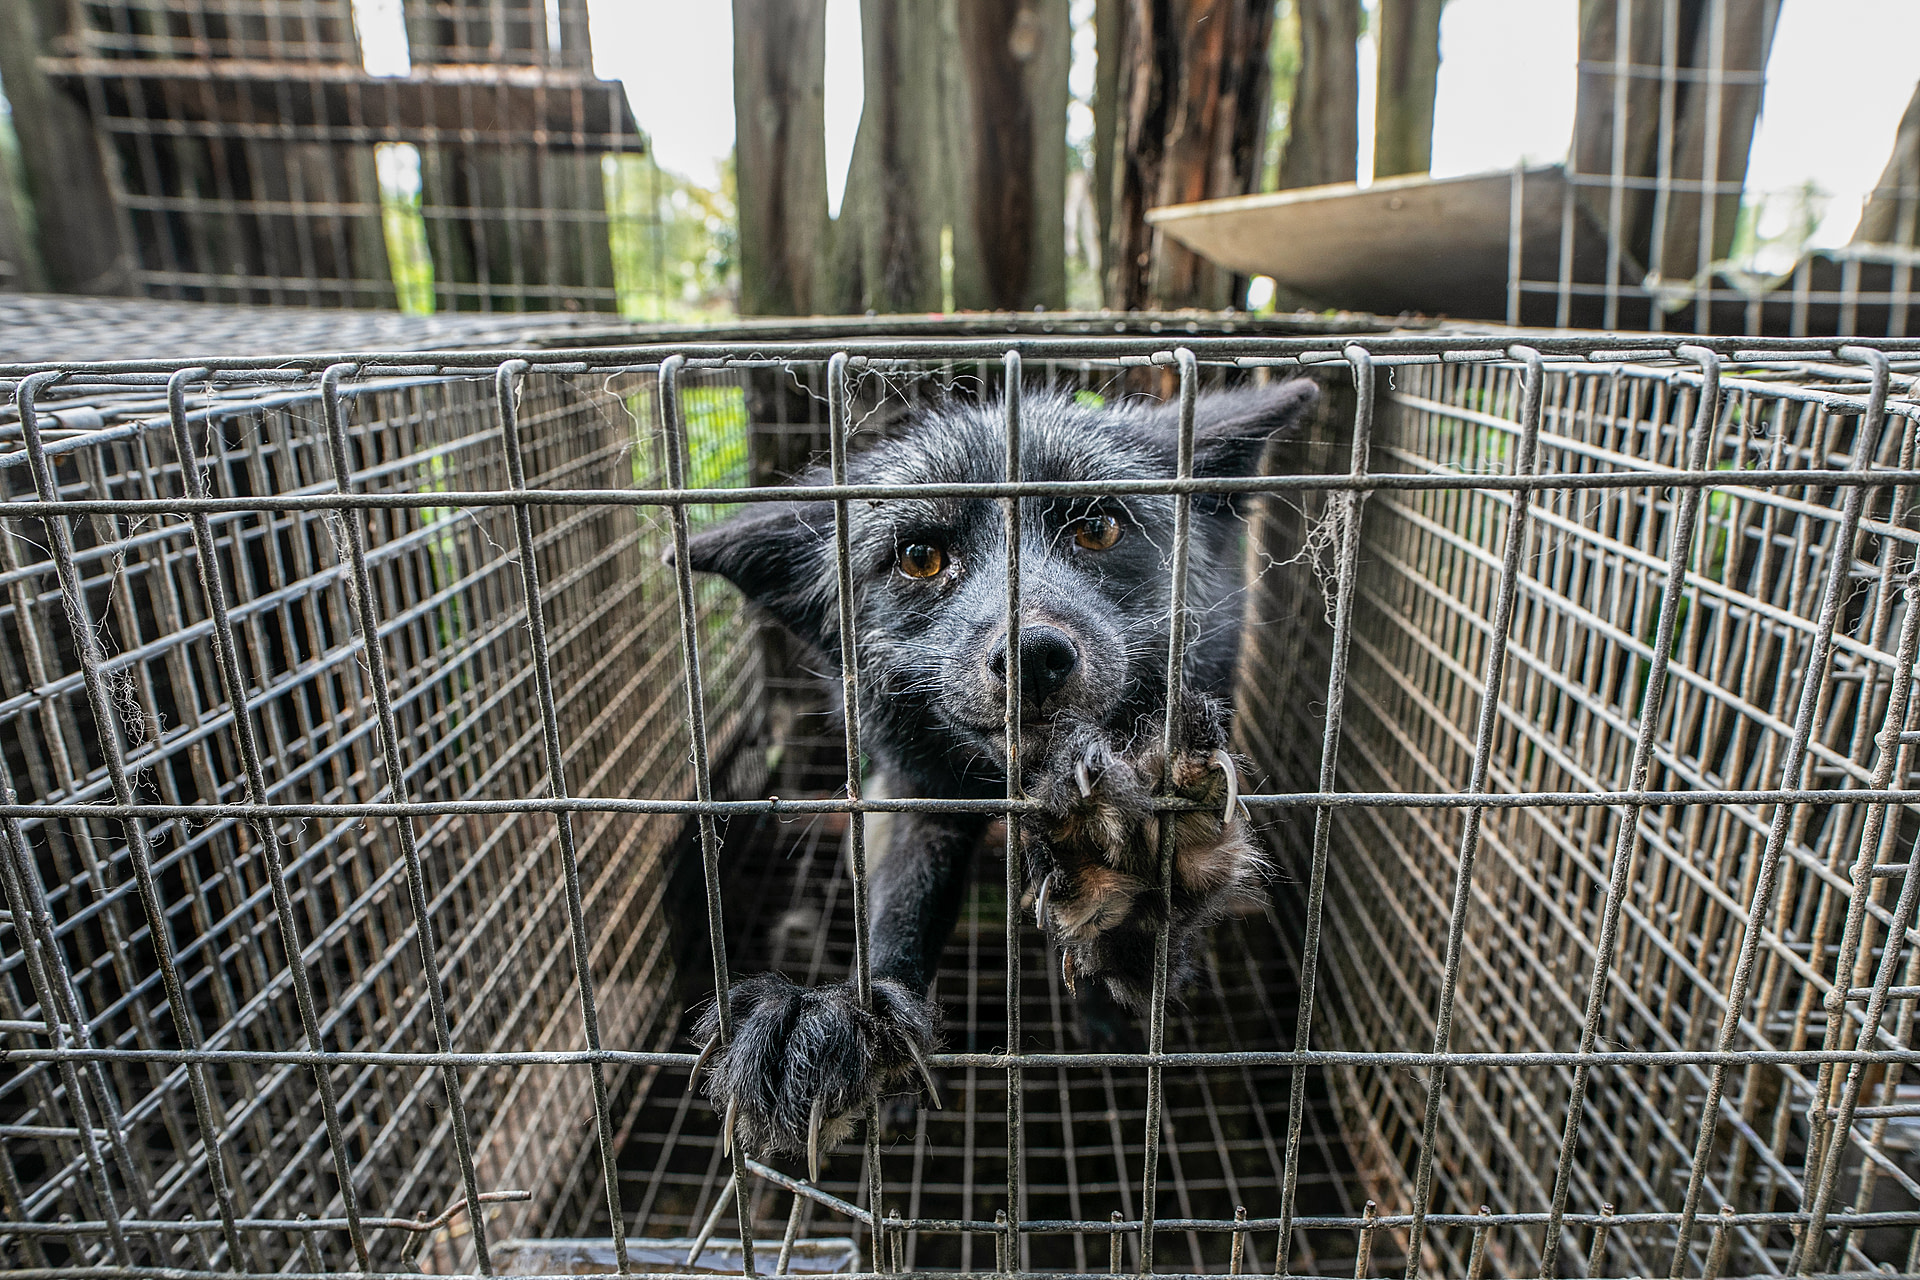 A silver fox paws at a tiny cage left open to the elements on a neglected fur farm. The inability to scratch and lack of care led to nail overgrowth. The foxes were removed due to welfare violations and the farm owners were accused of animal abuse. As of 2021 the lawsuit is ongoing. Goliszow, Poland, 2017. Andrew Skowron / We Animals Media